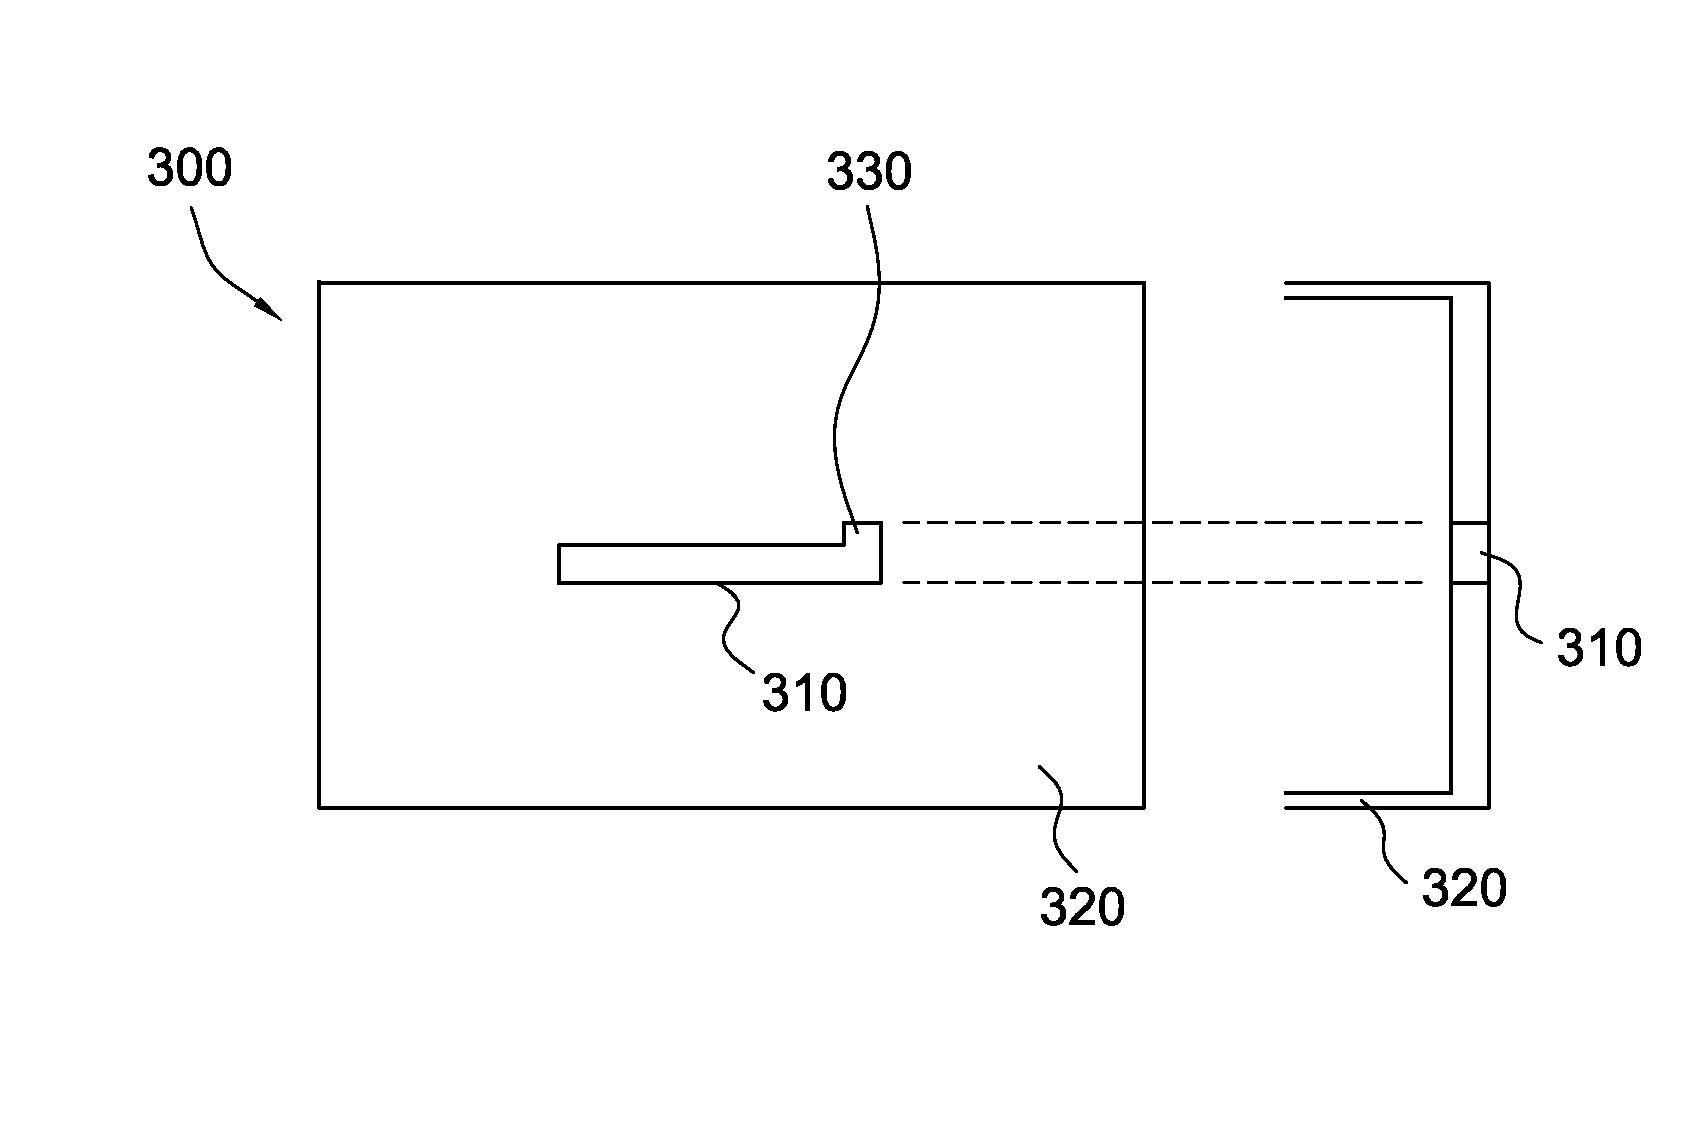 Integrated Test Device for Optical and Electrochemical Assays